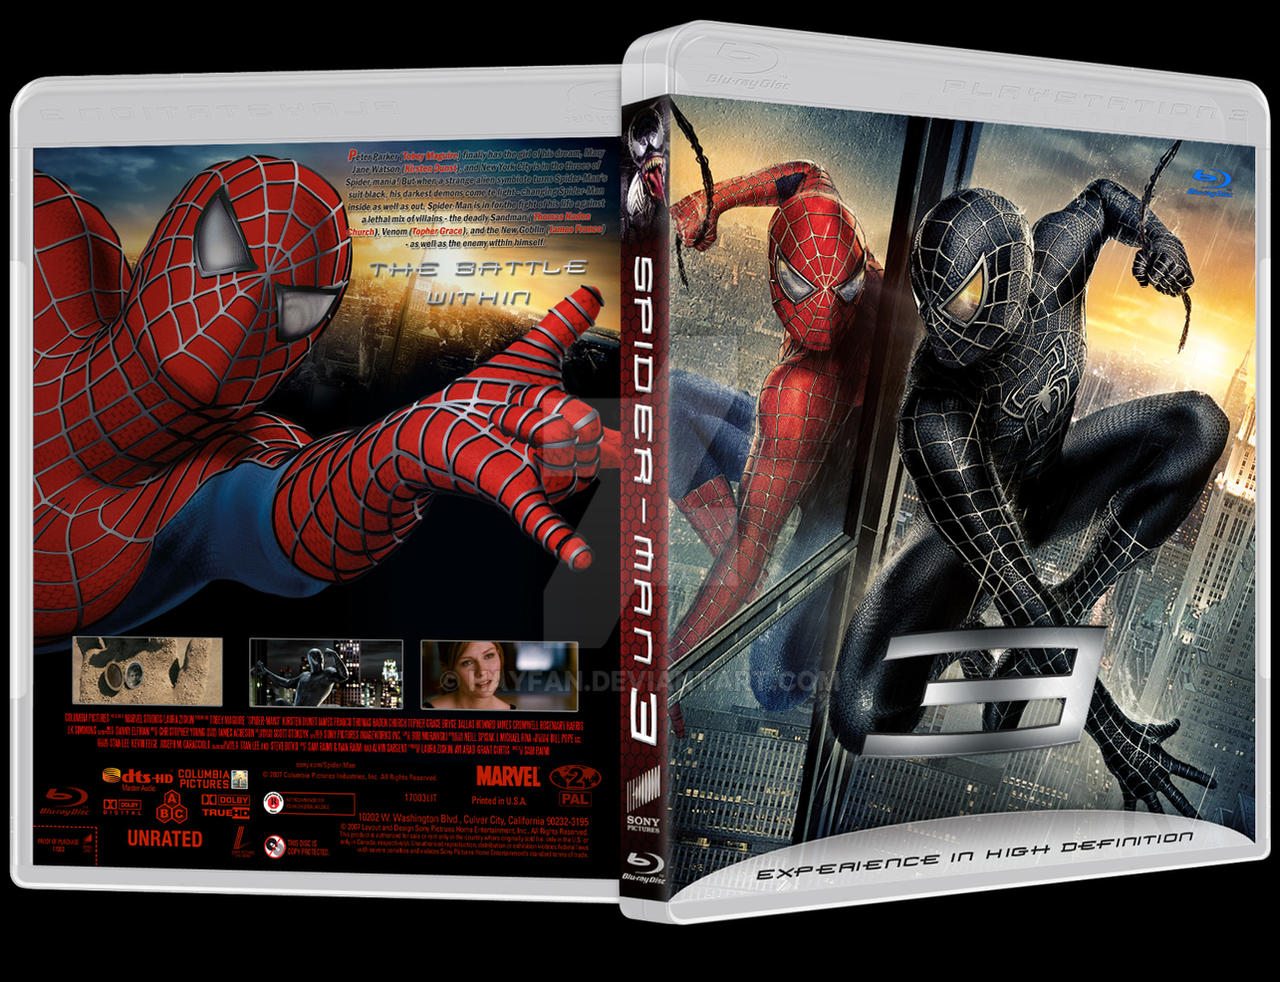 COVERS.BOX.SK ::: spiderman 3 dvd cover + label - high quality DVD /  Blueray / Movie